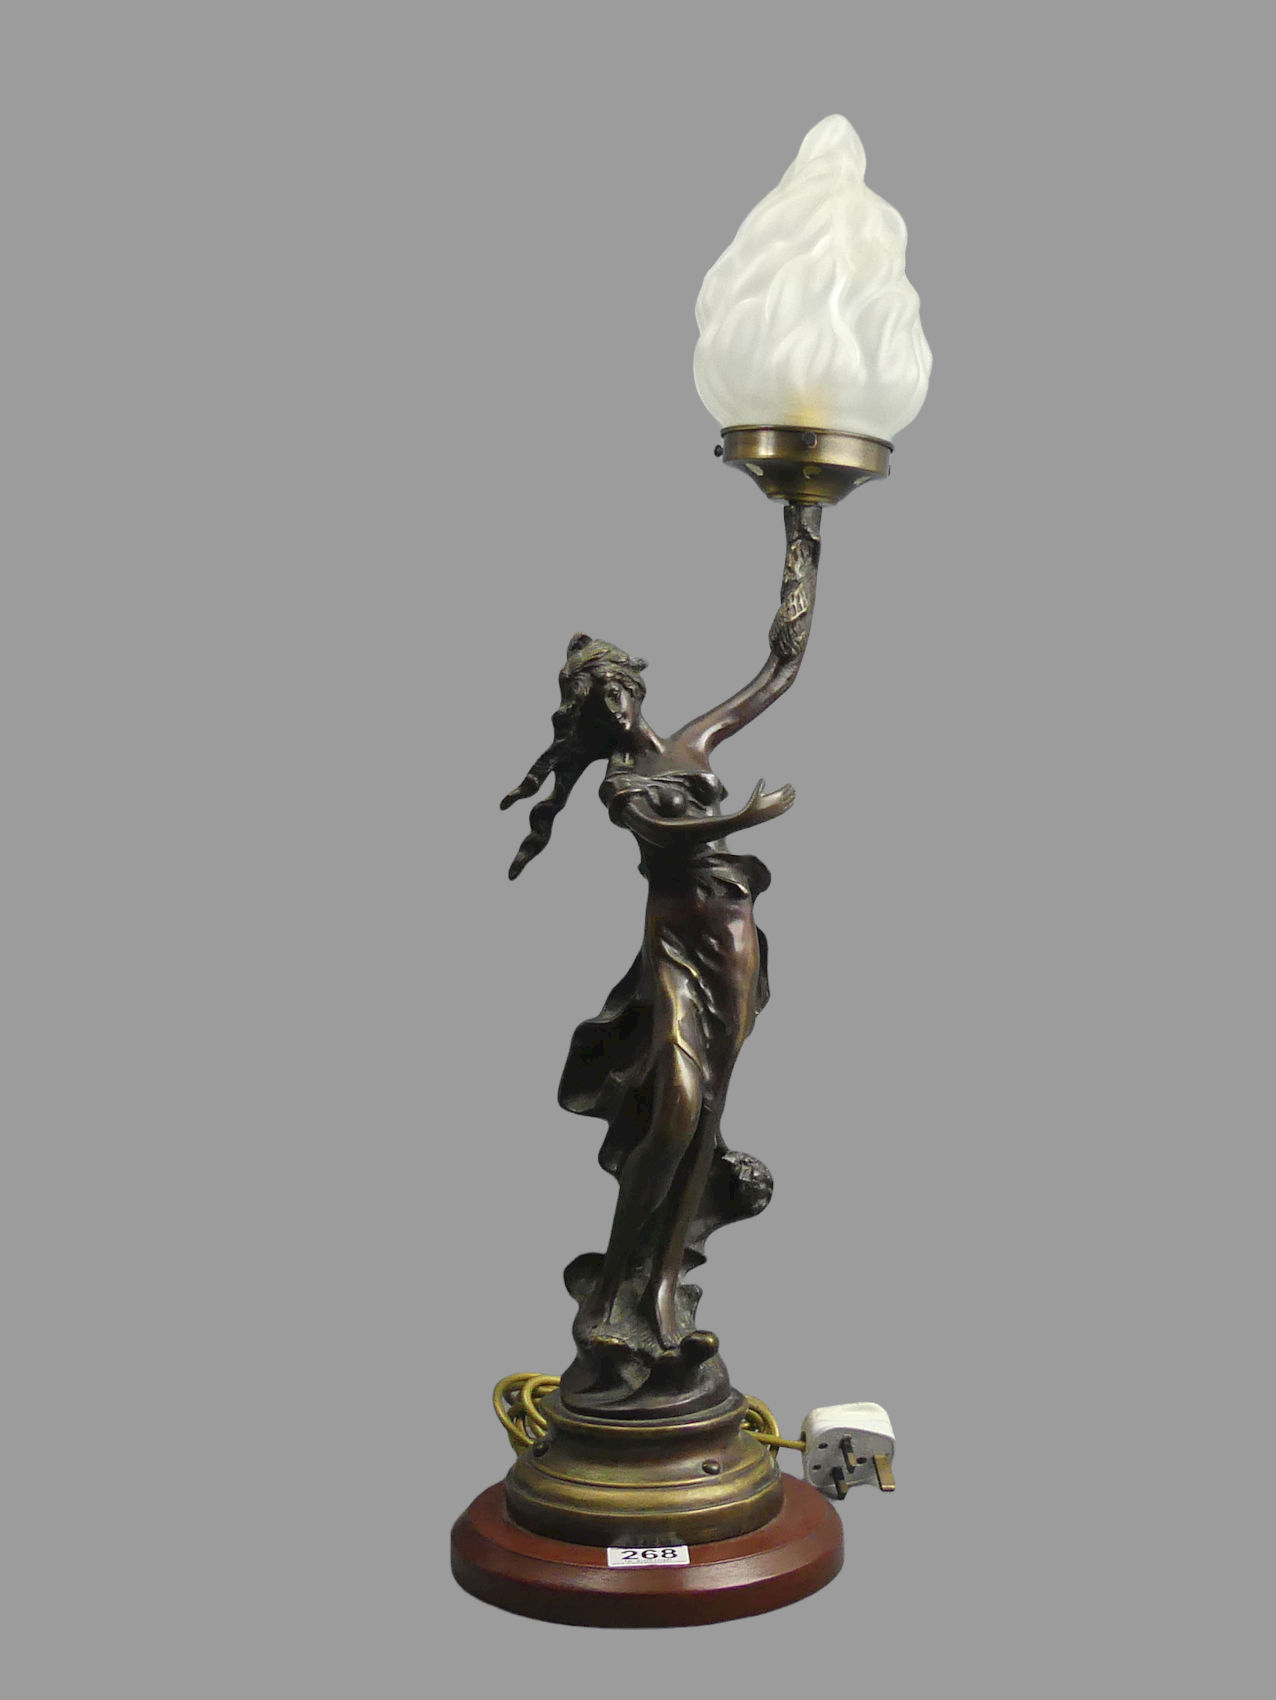 Bronze Art Nouveau style figural lamp with a glass flame shade. 75 cm. UK Postage £30. - Image 5 of 5